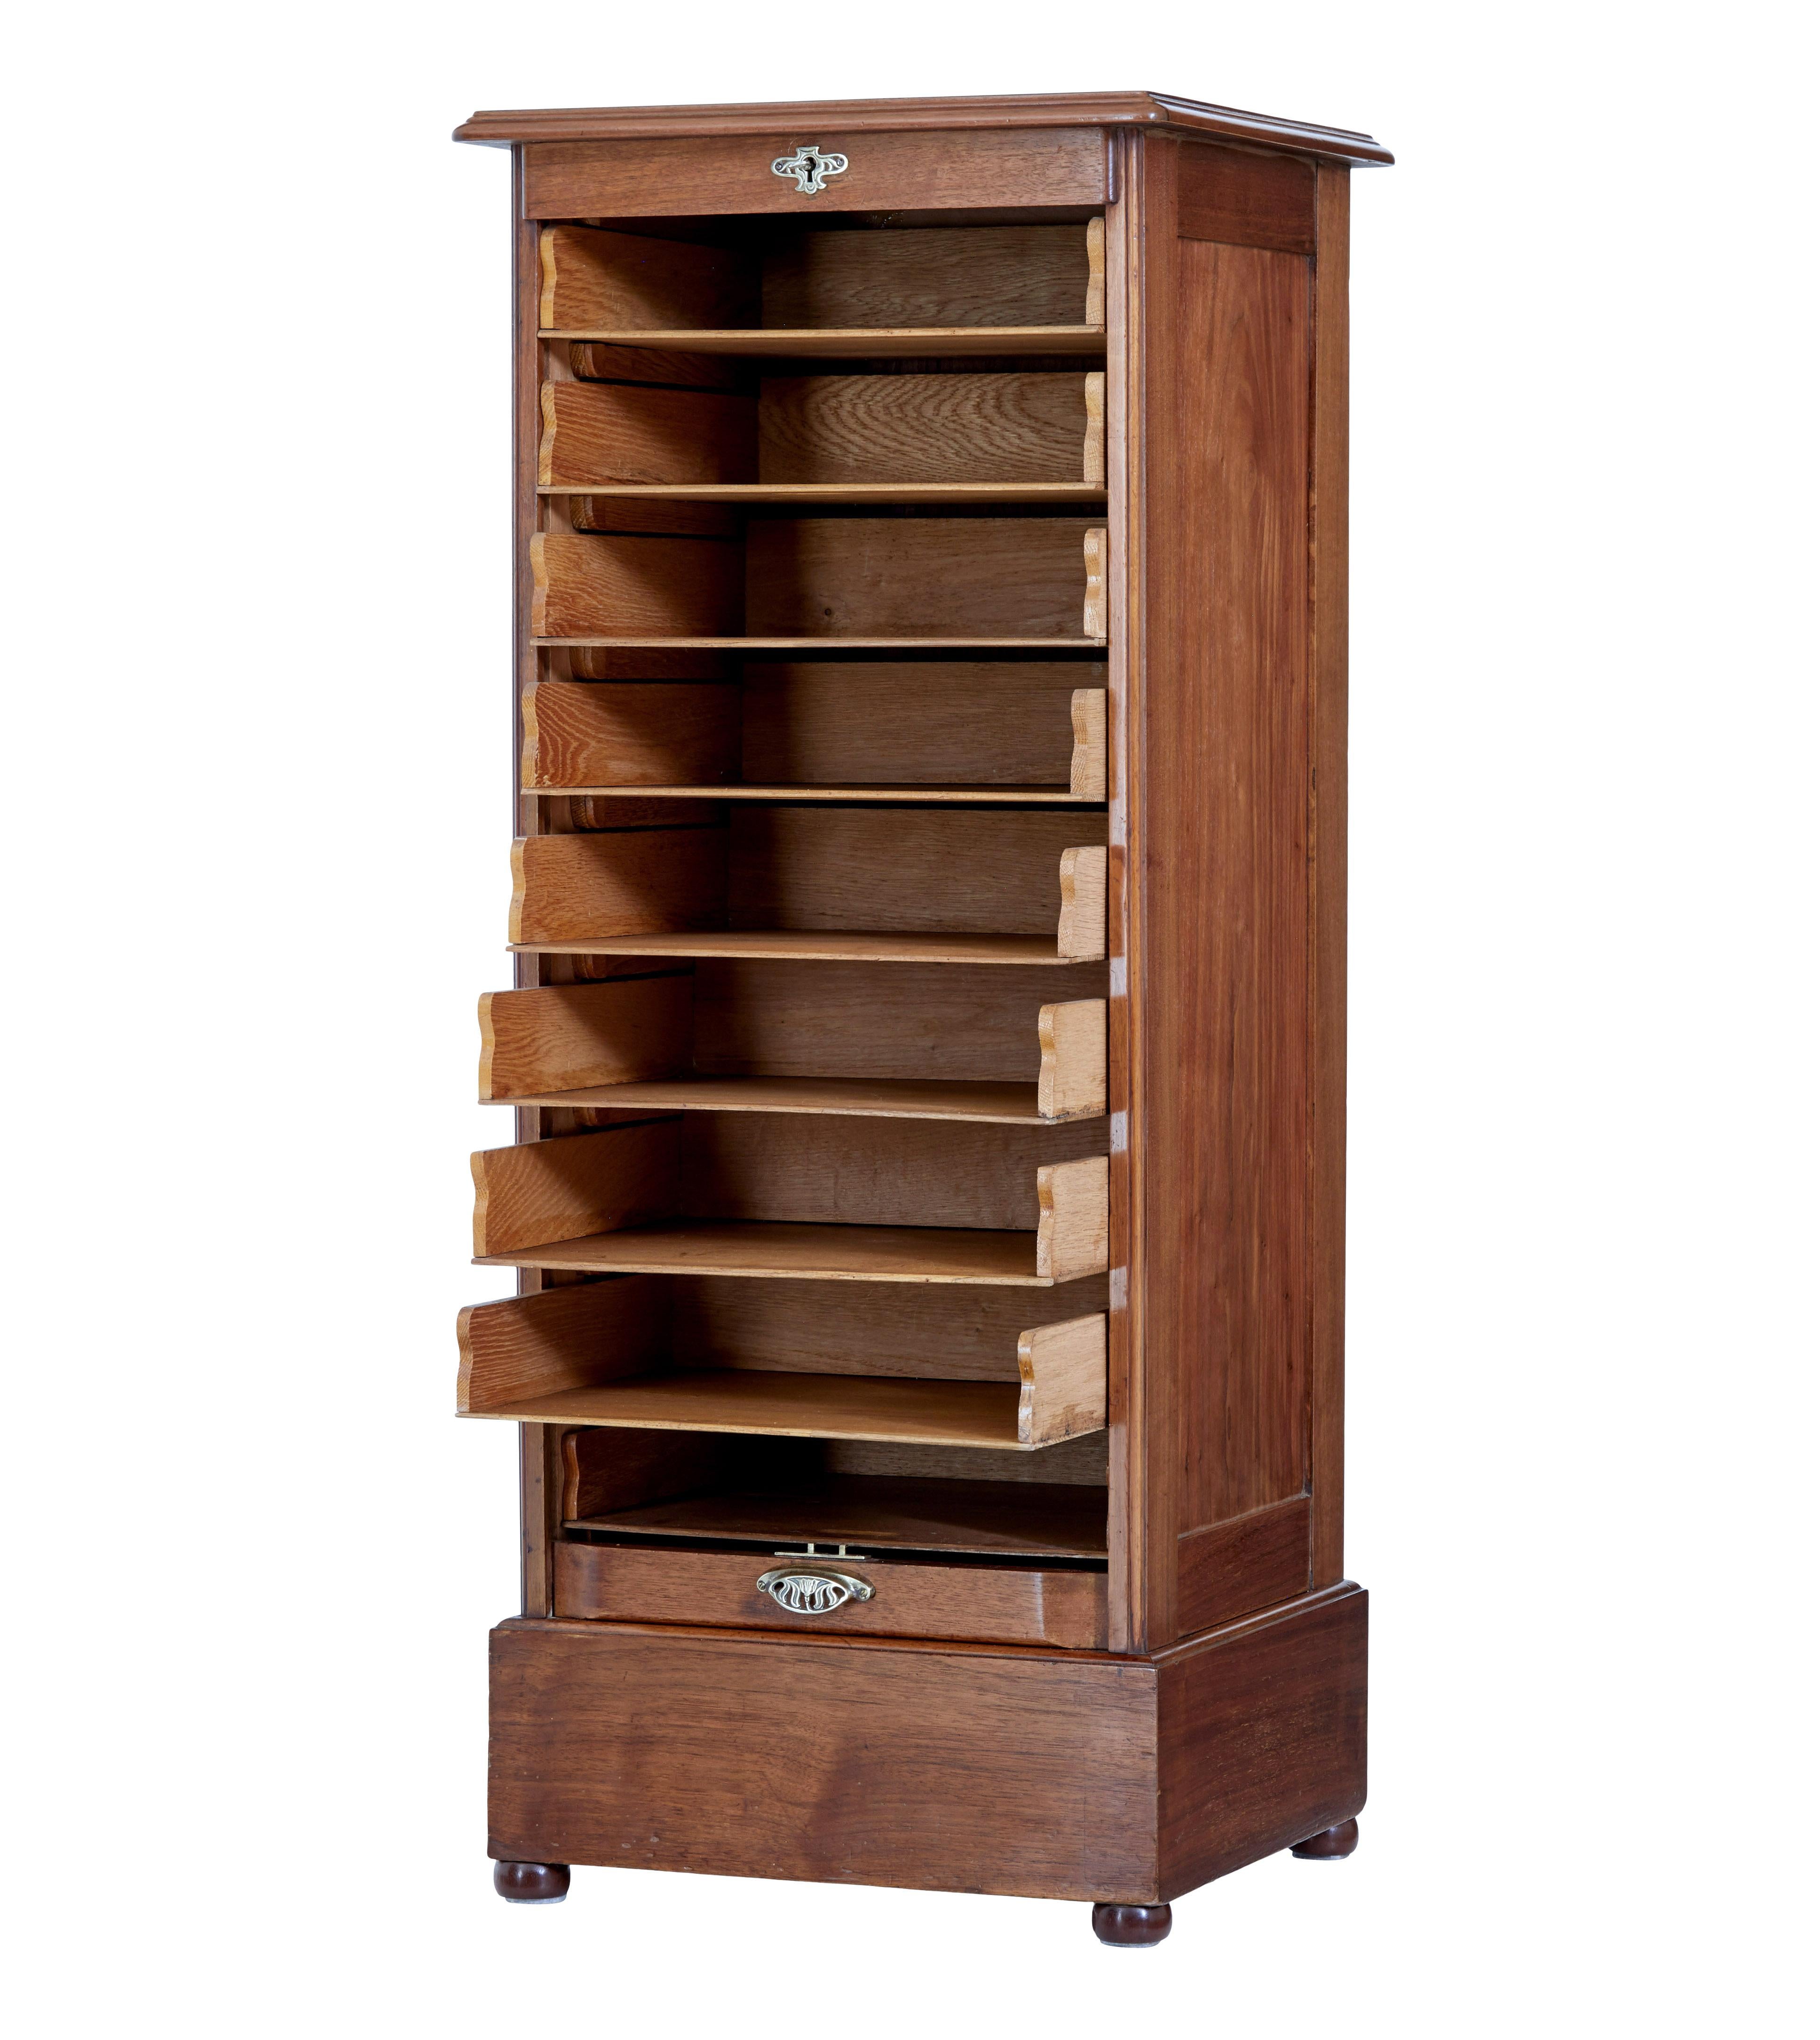 Early 20th century walnut tambour cabinet circa 1910.

Good quality tambour fronted drawer cabinet. These cabinets are usually made in oak and mahogany but this one is made in walnut.

Typical piece that would have been found in an edwardian office